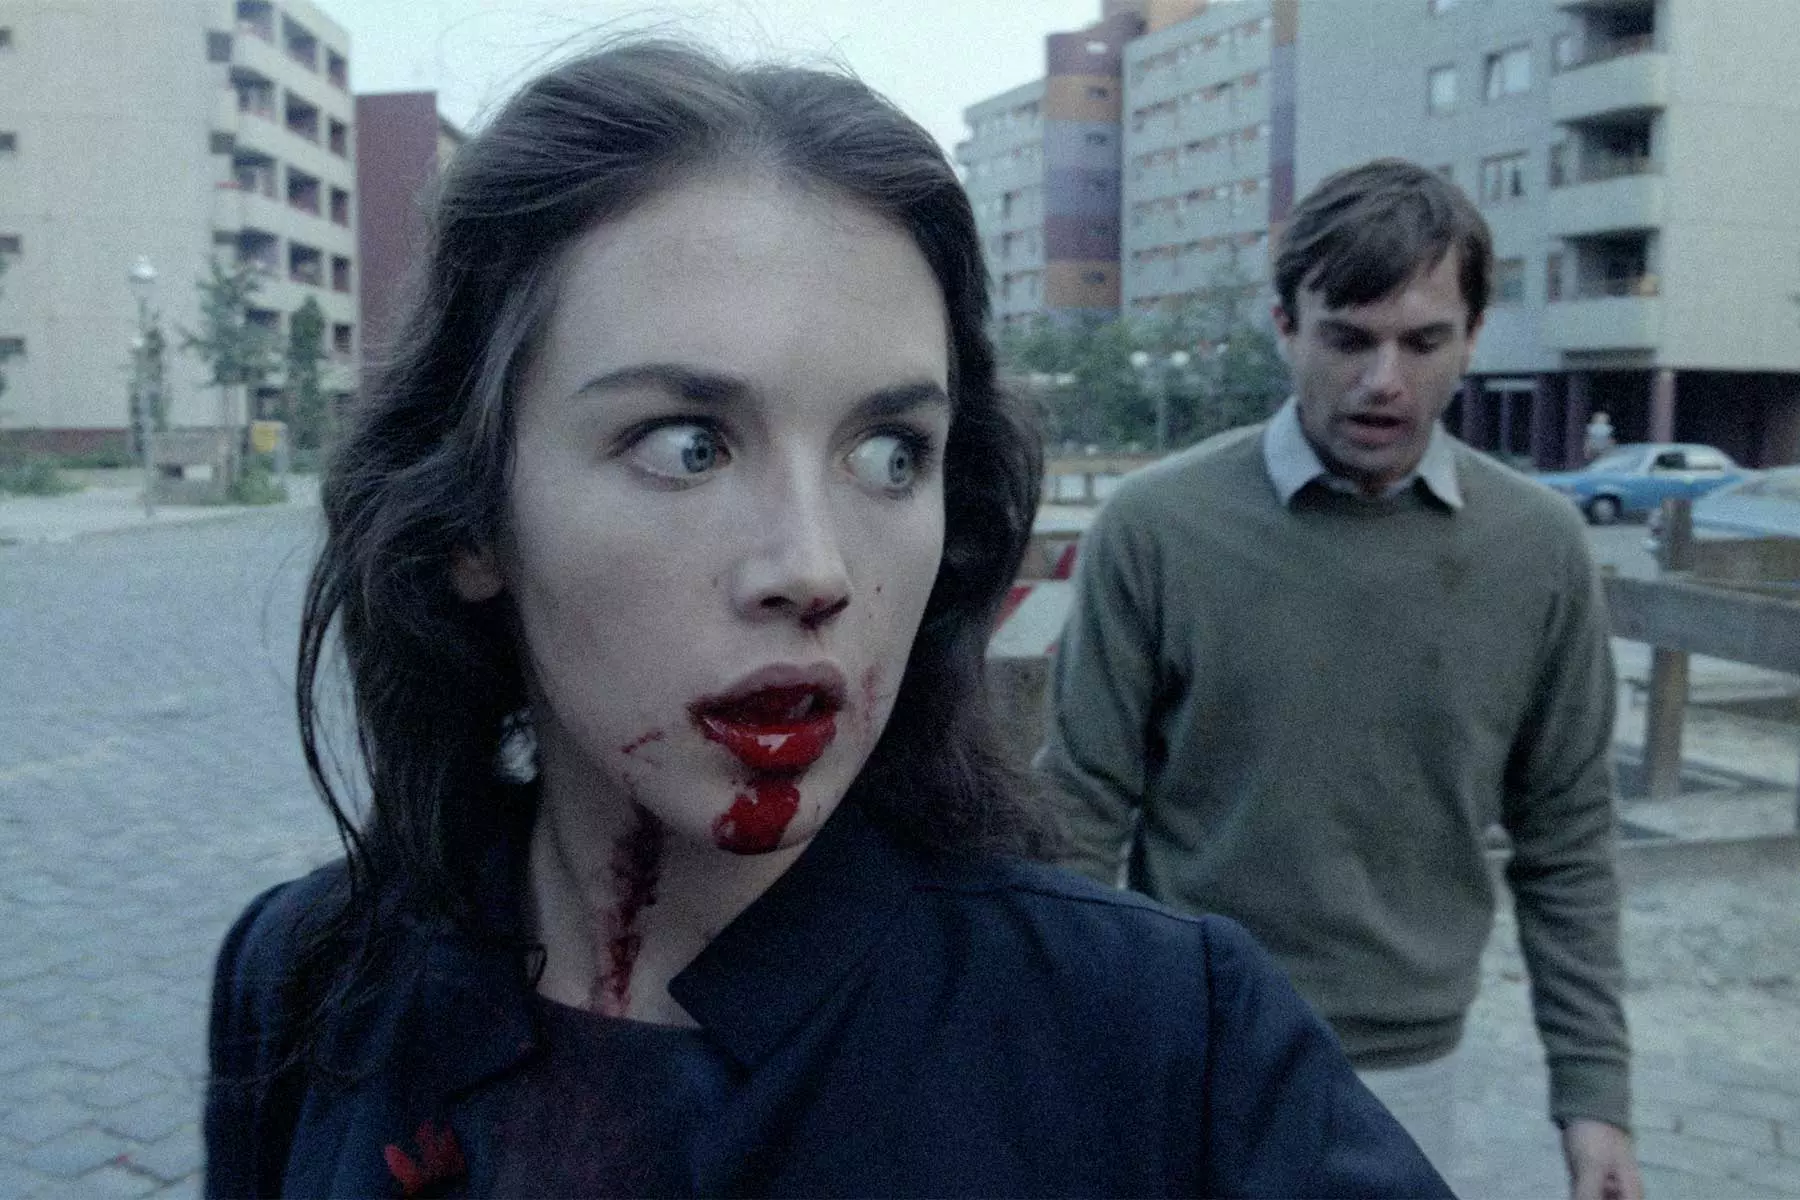 A scene from the movie Taskere featuring Isabelle Ajani with a bloody mouth